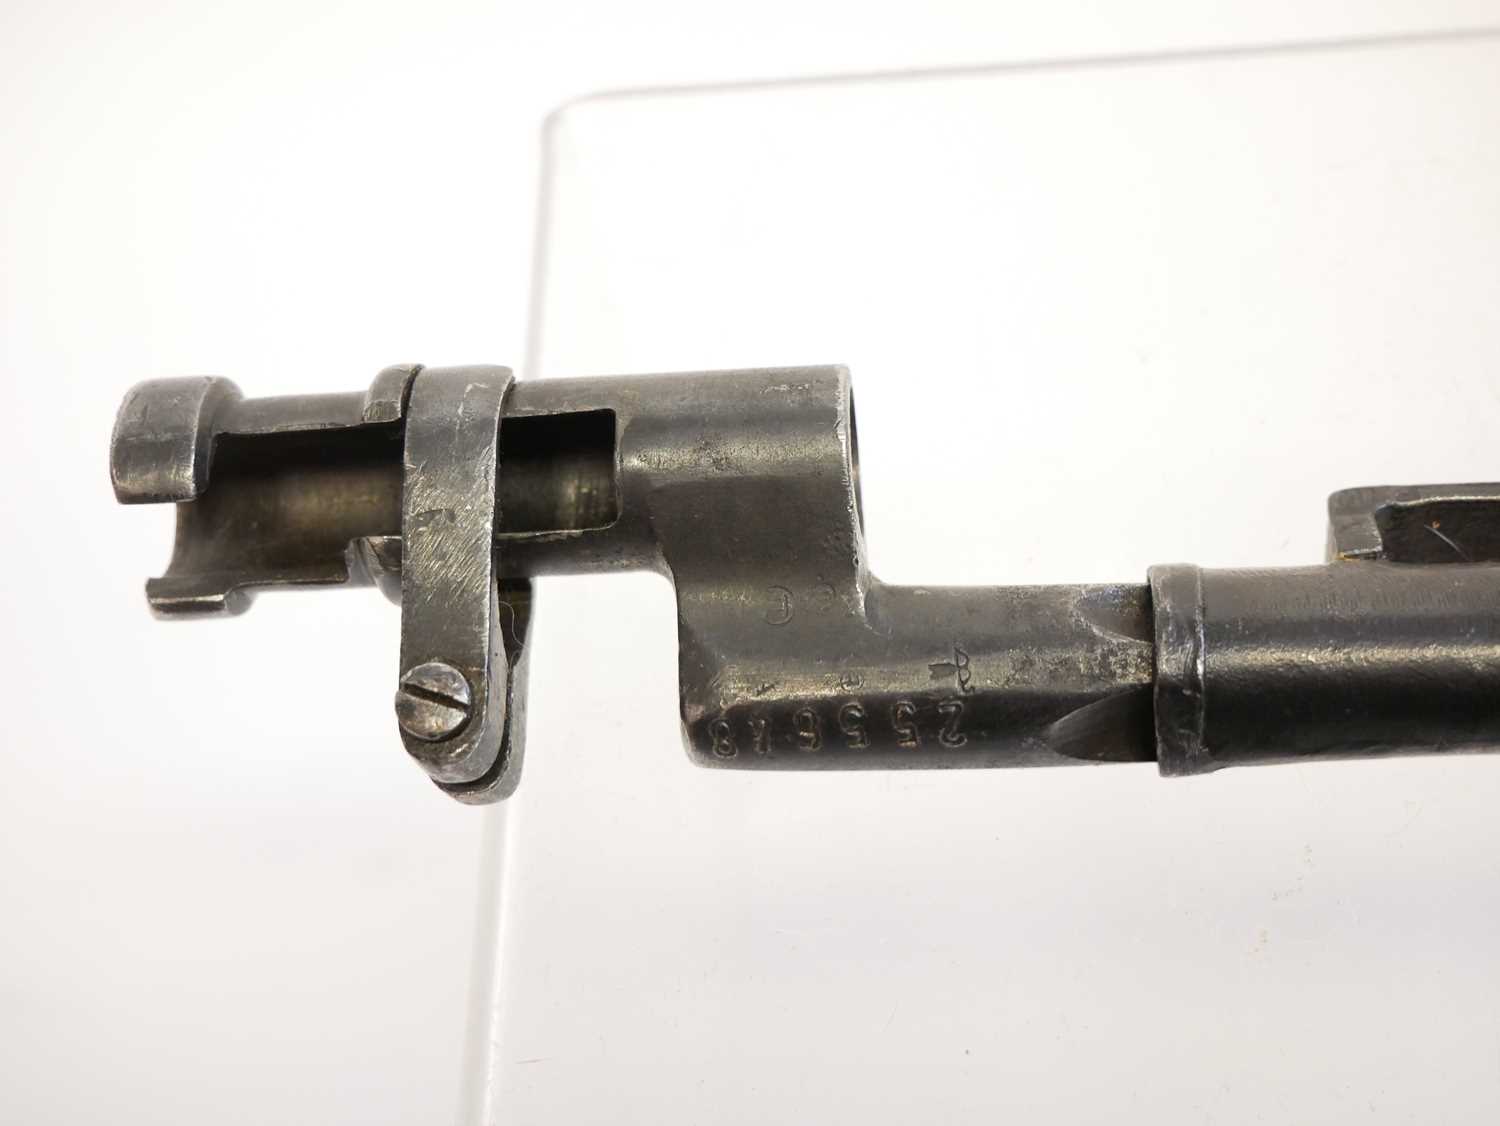 Russian M1891 Mosin-Nagant rifle socket bayonet in its steel scabbard as issued by Austria-Hungary - Image 2 of 7